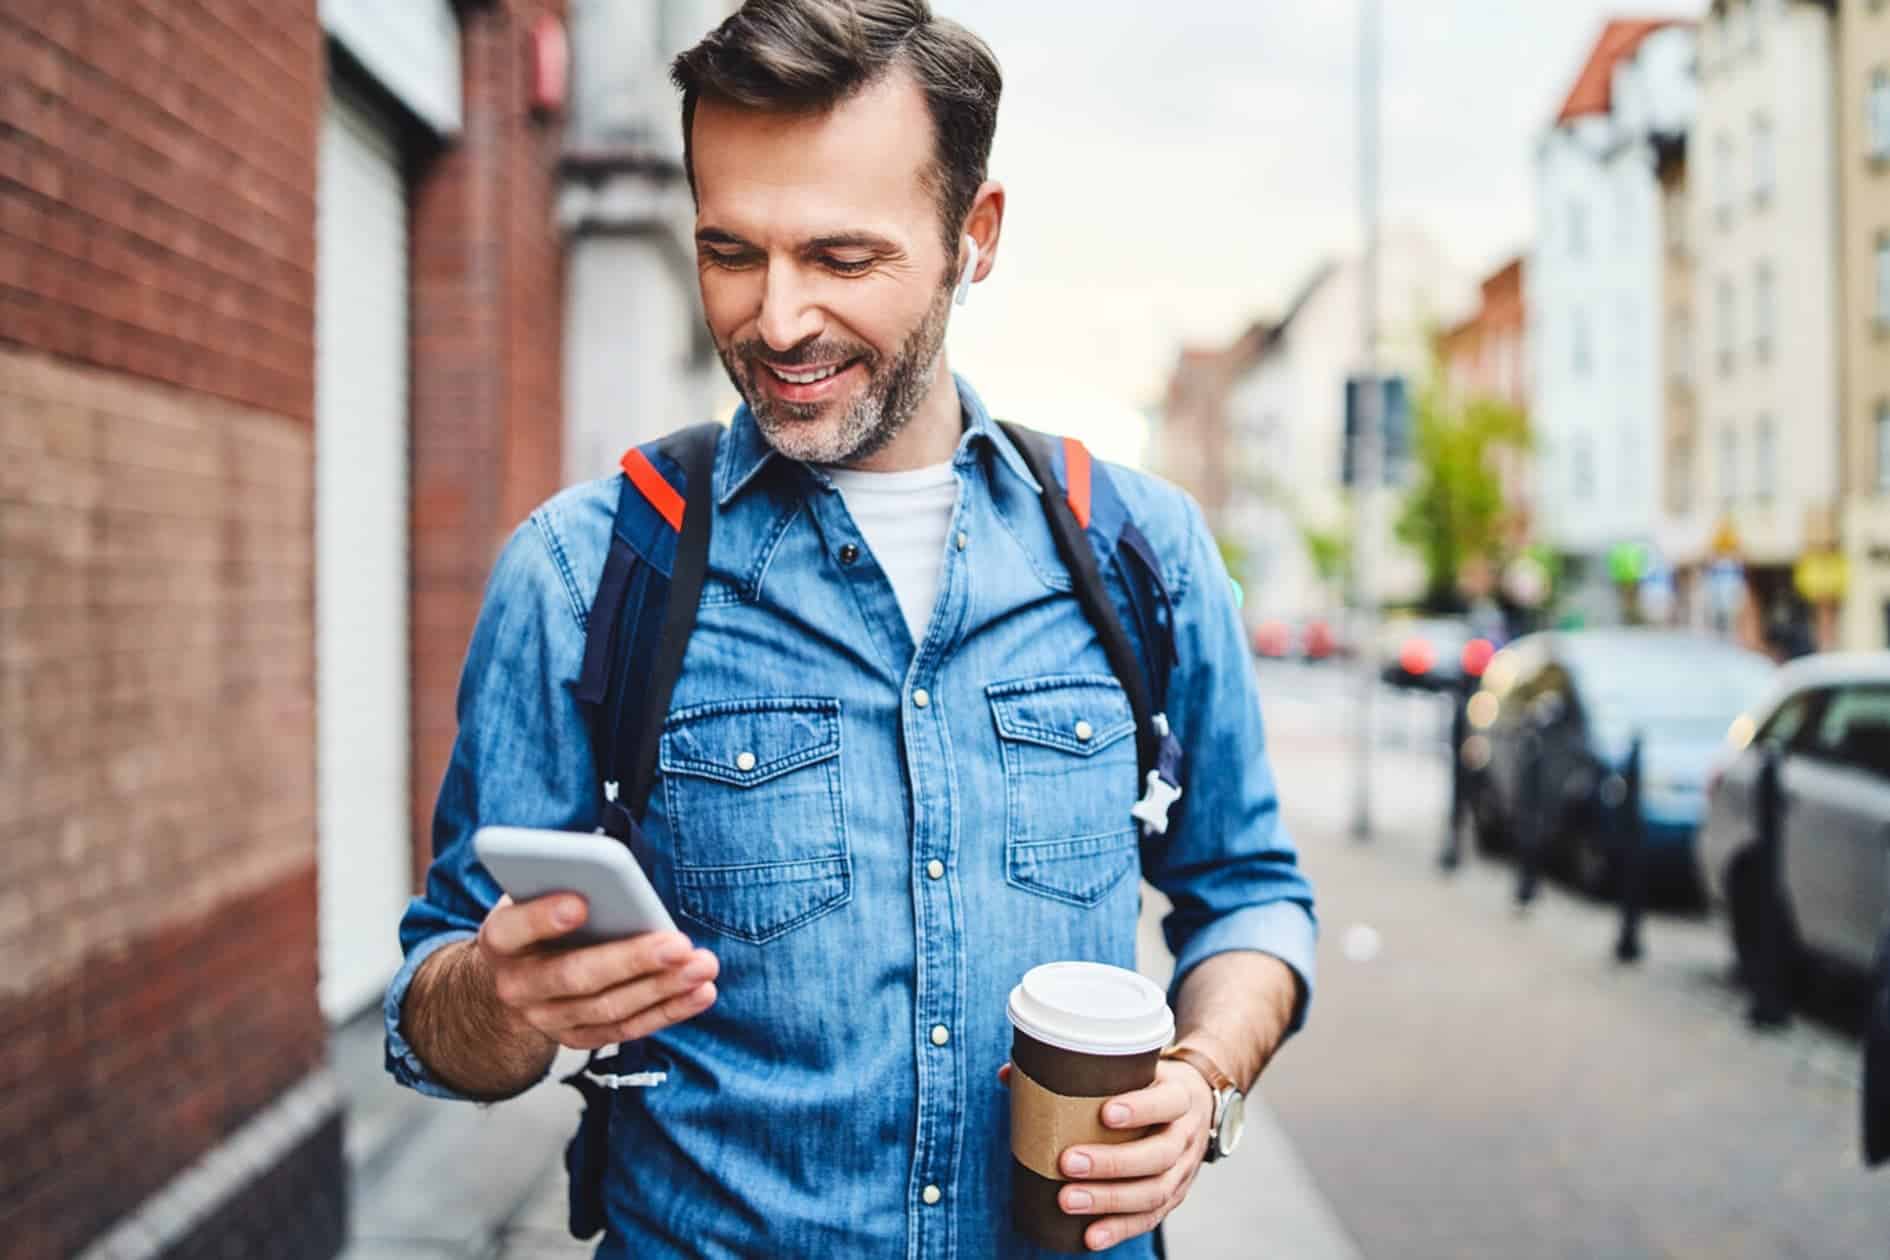 A man walking down the pavement with a takeaway coffee in one hand and his mobile in the other. He is looking at his mobile, smiling